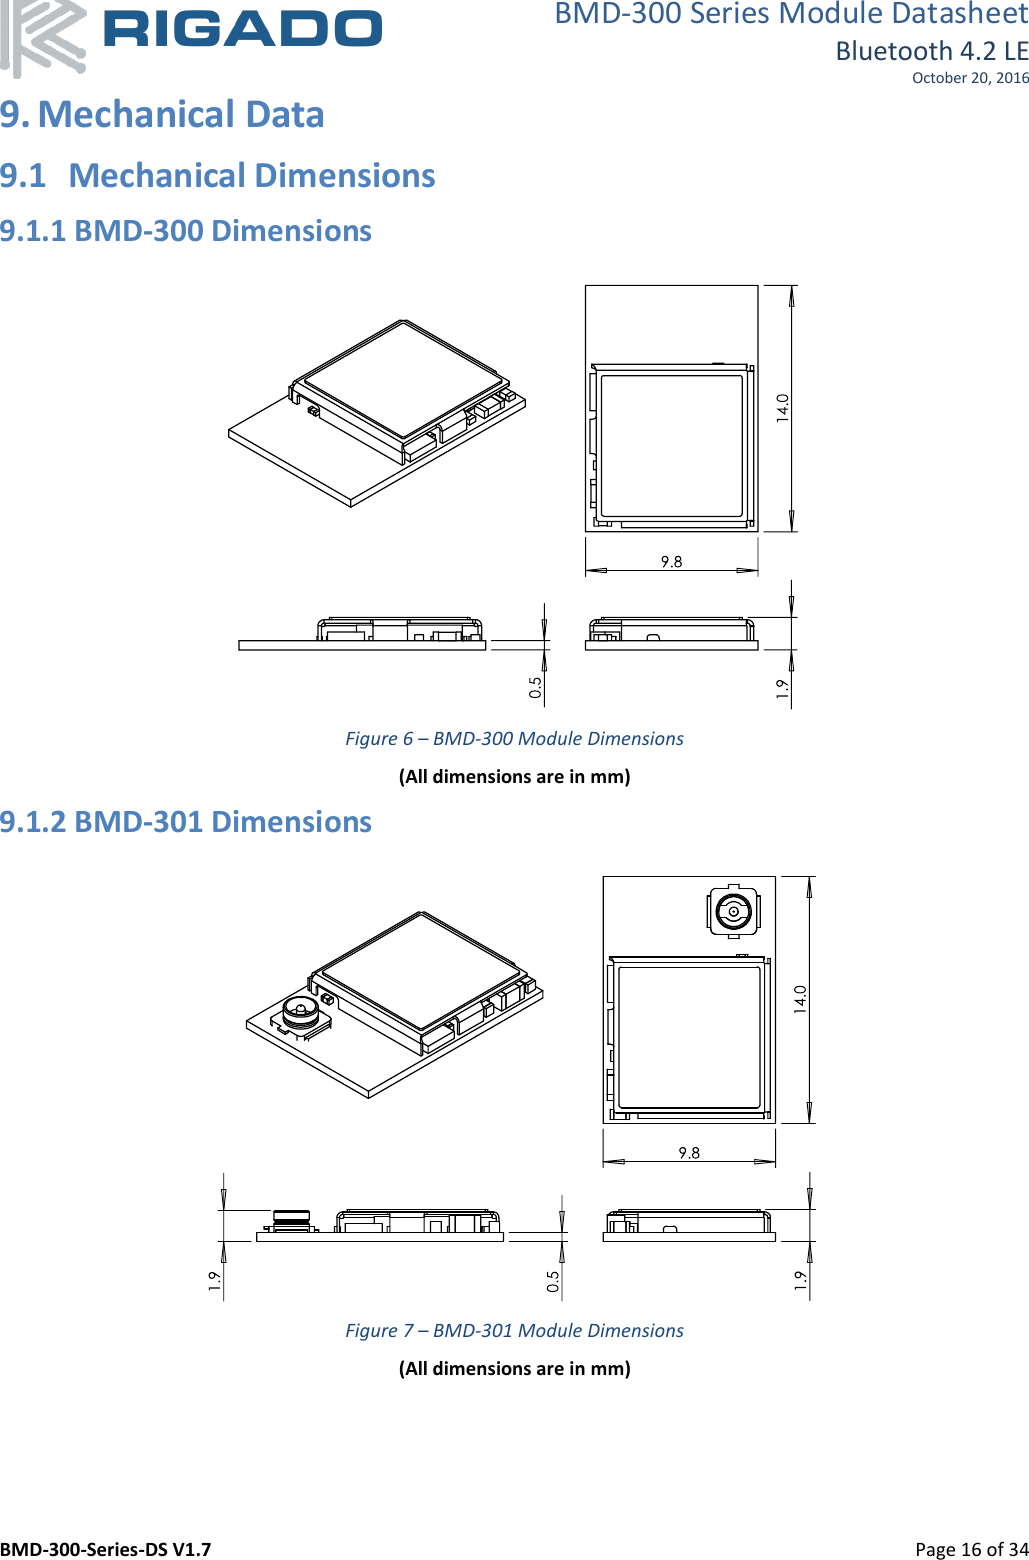 BMD-300 Series Module Datasheet Bluetooth 4.2 LE October 20, 2016 BMD-300-Series-DS V1.7         Page 16 of 34 9. Mechanical Data 9.1  Mechanical Dimensions 9.1.1 BMD-300 Dimensions    Figure 6 – BMD-300 Module Dimensions (All dimensions are in mm) 9.1.2 BMD-301 Dimensions    Figure 7 – BMD-301 Module Dimensions (All dimensions are in mm) 